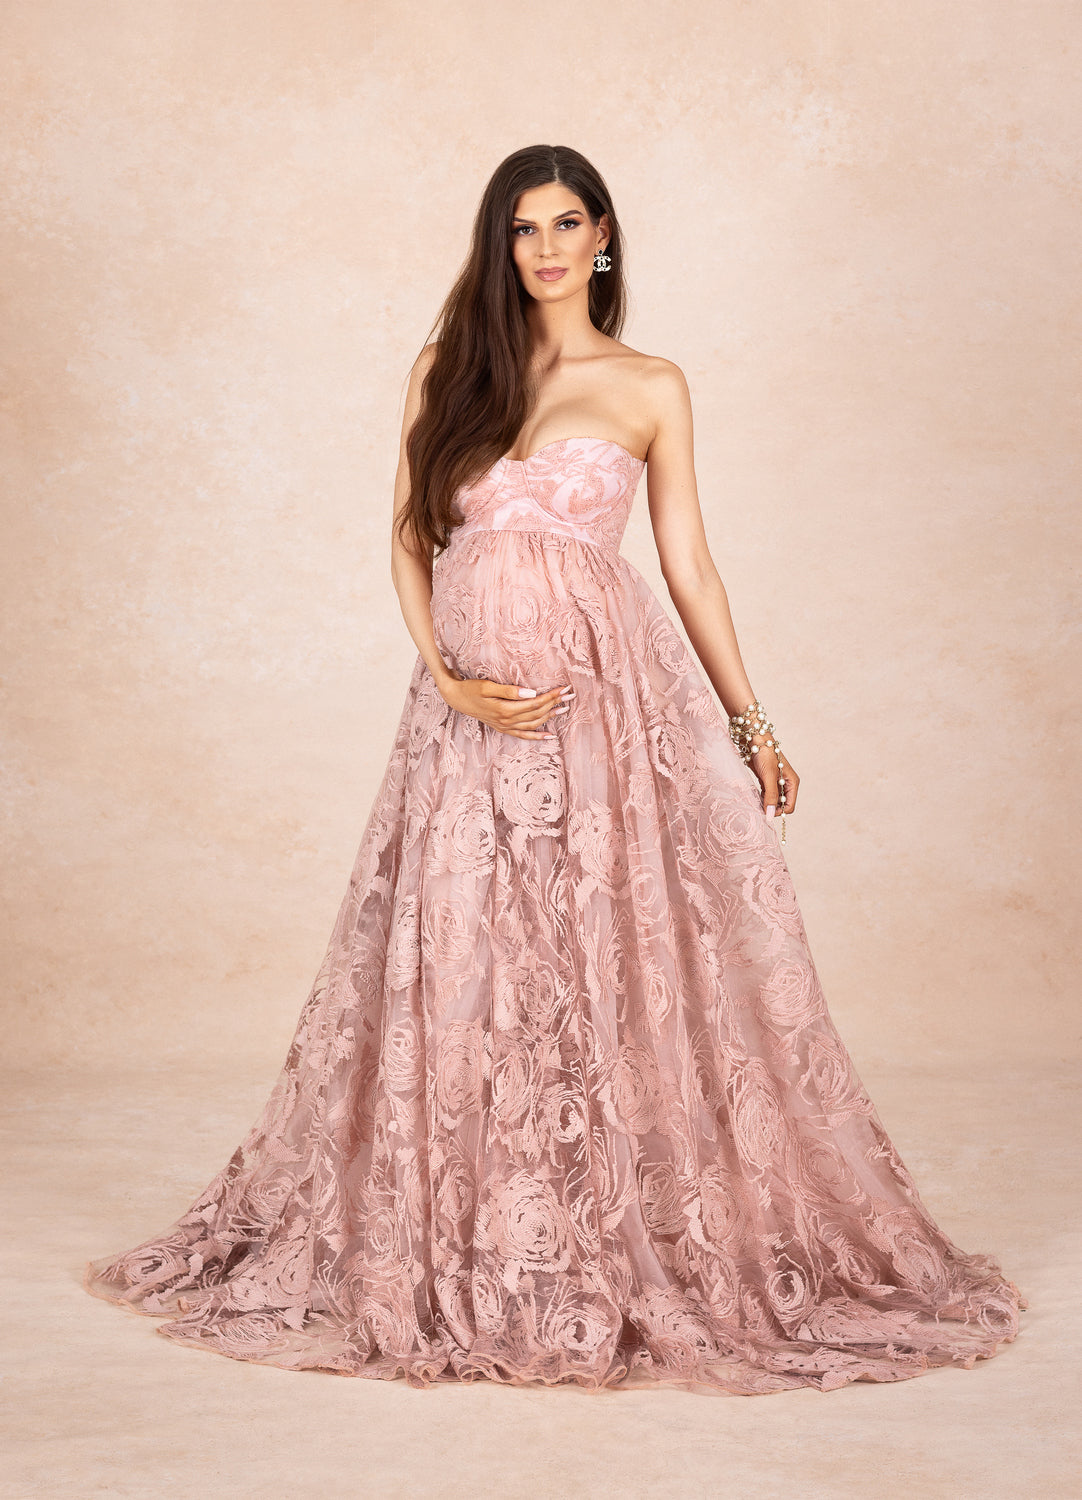 Dusty Pink Rose Gown - maternity photoshoot dress